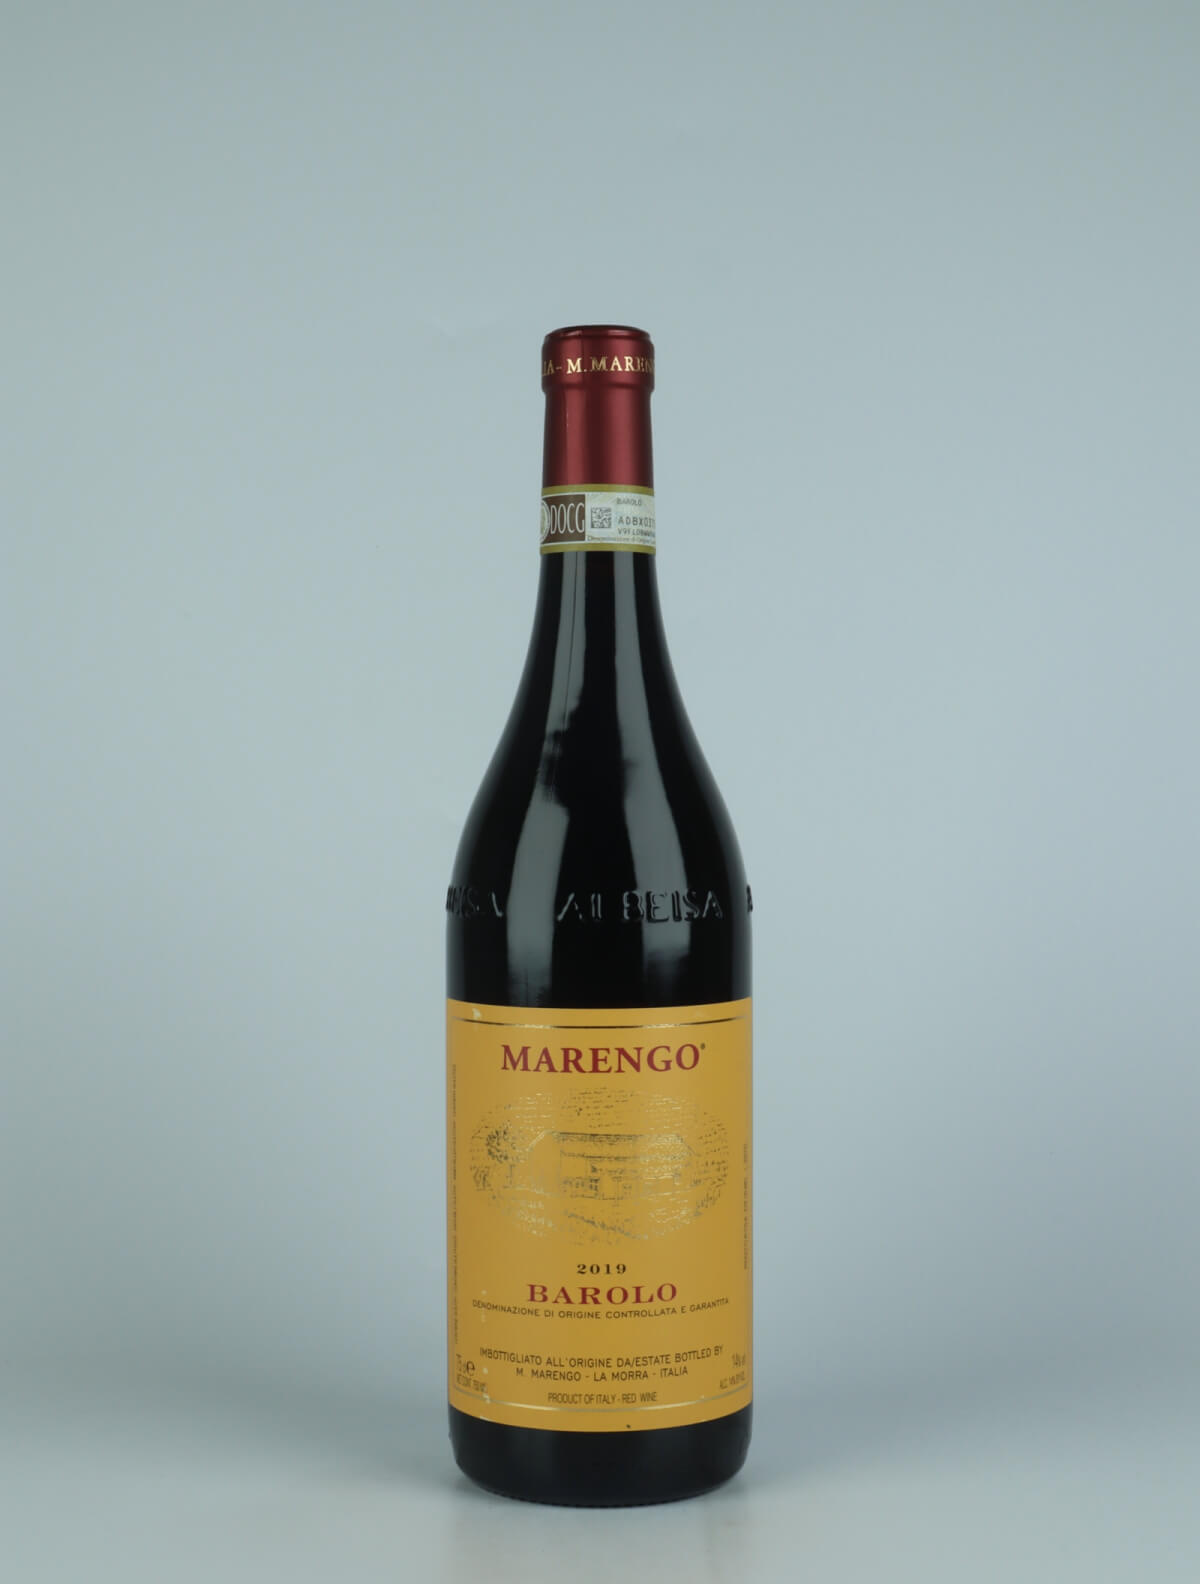 A bottle 2019 Barolo Red wine from Mario Marengo, Piedmont in Italy